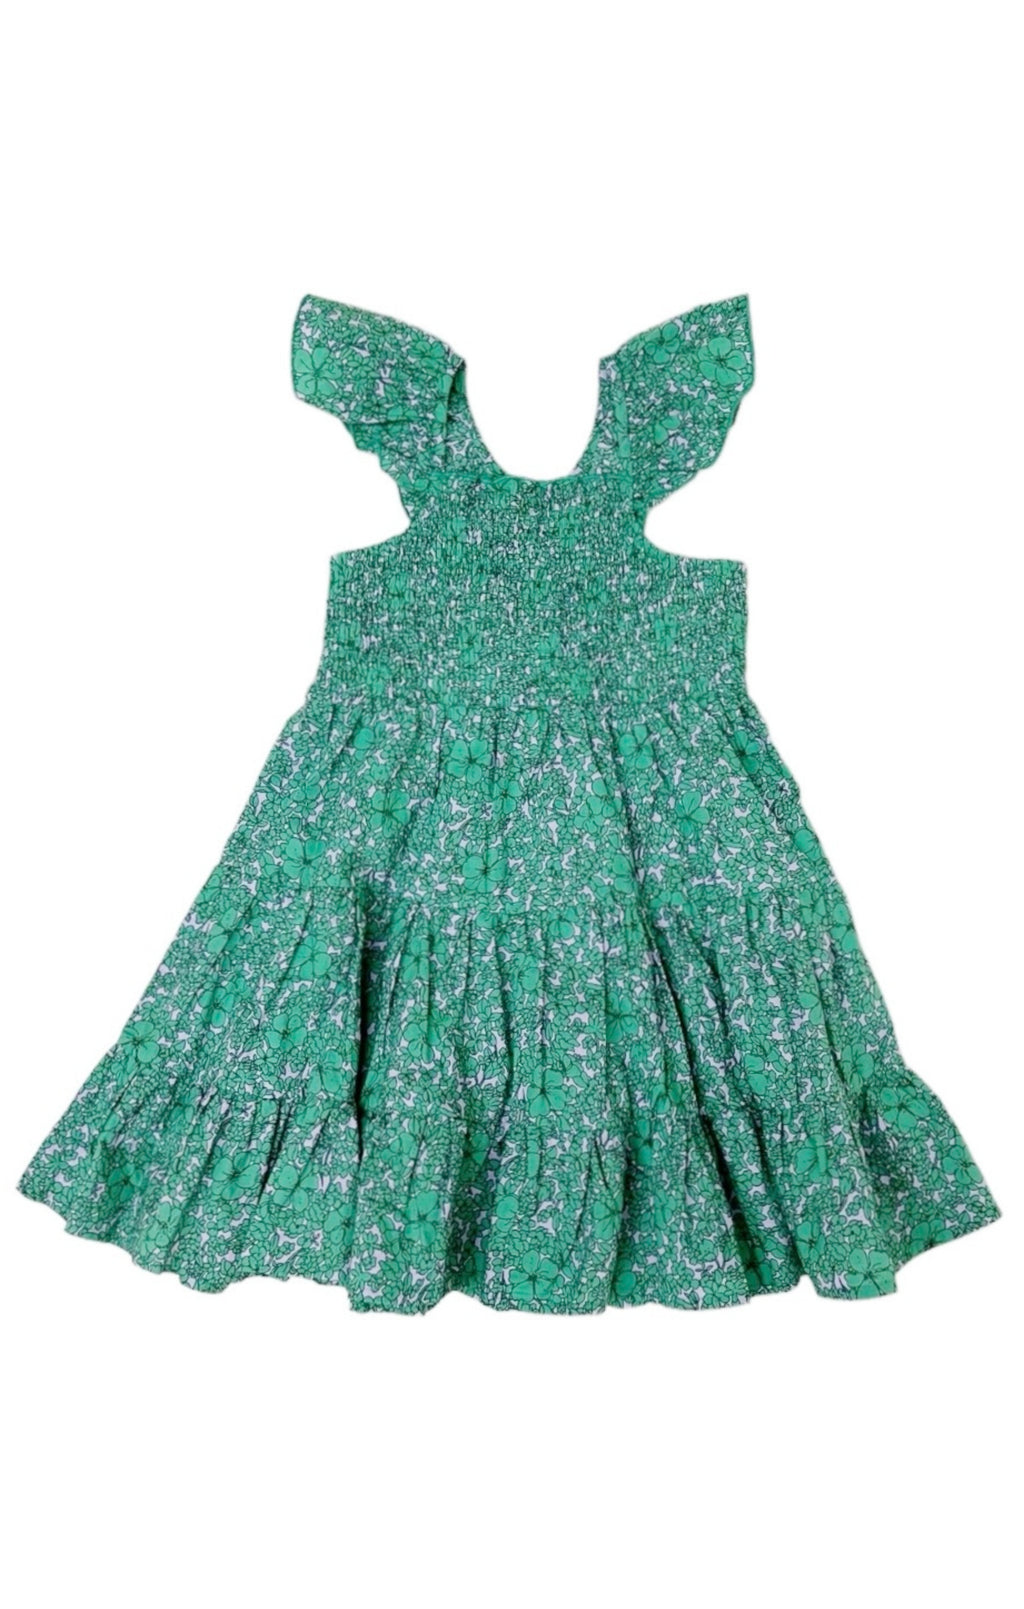 ISOBELLA & CHLOE (NEW) with tags Dress Size: 5 Years